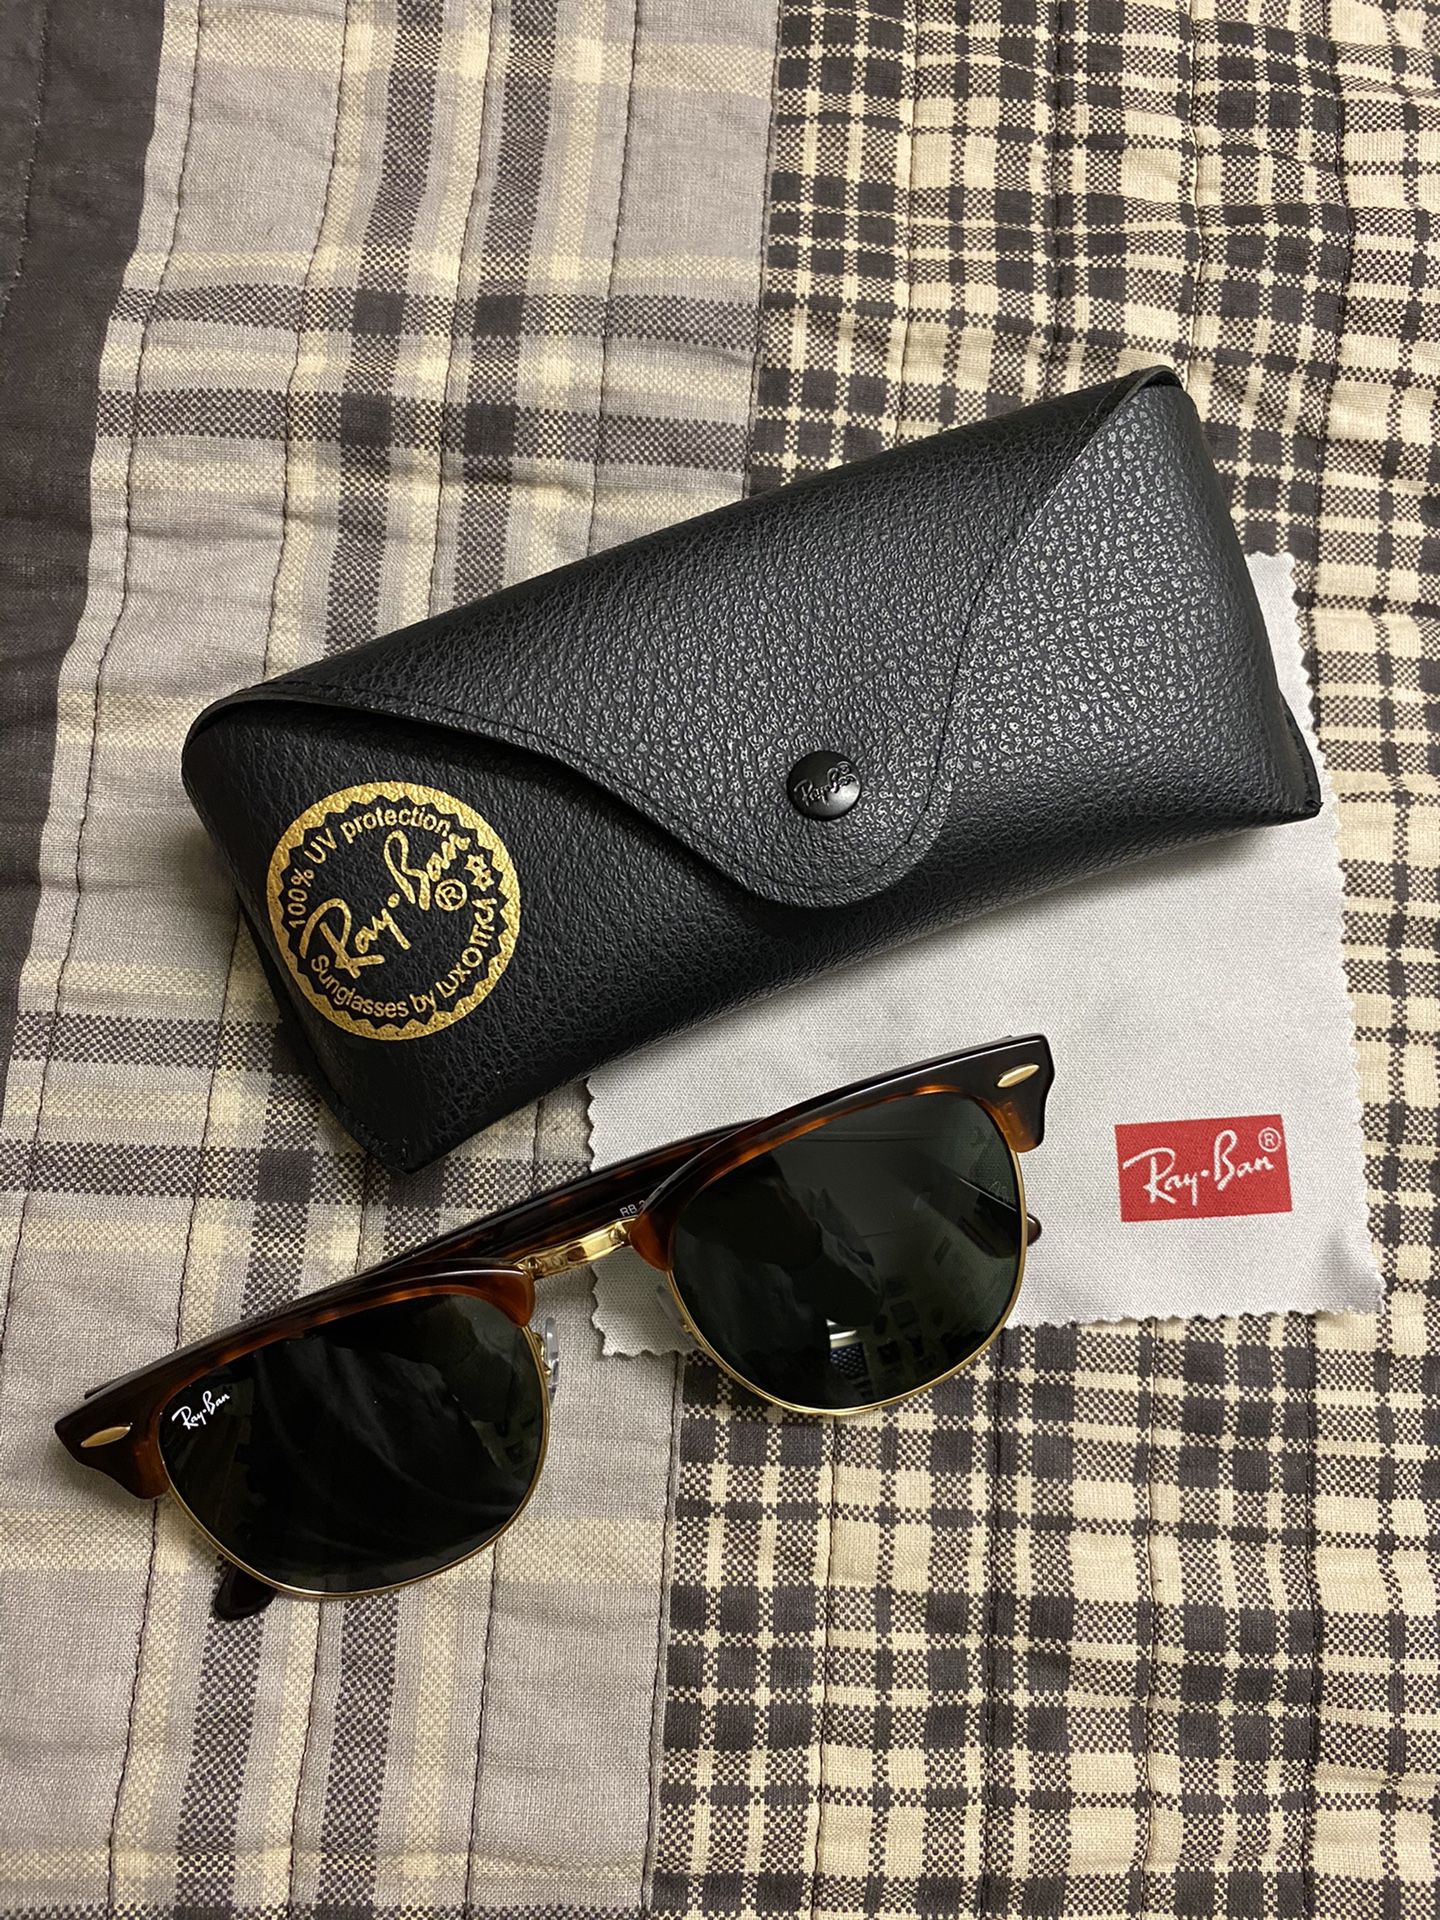 RayBan Clubmasters 51mm